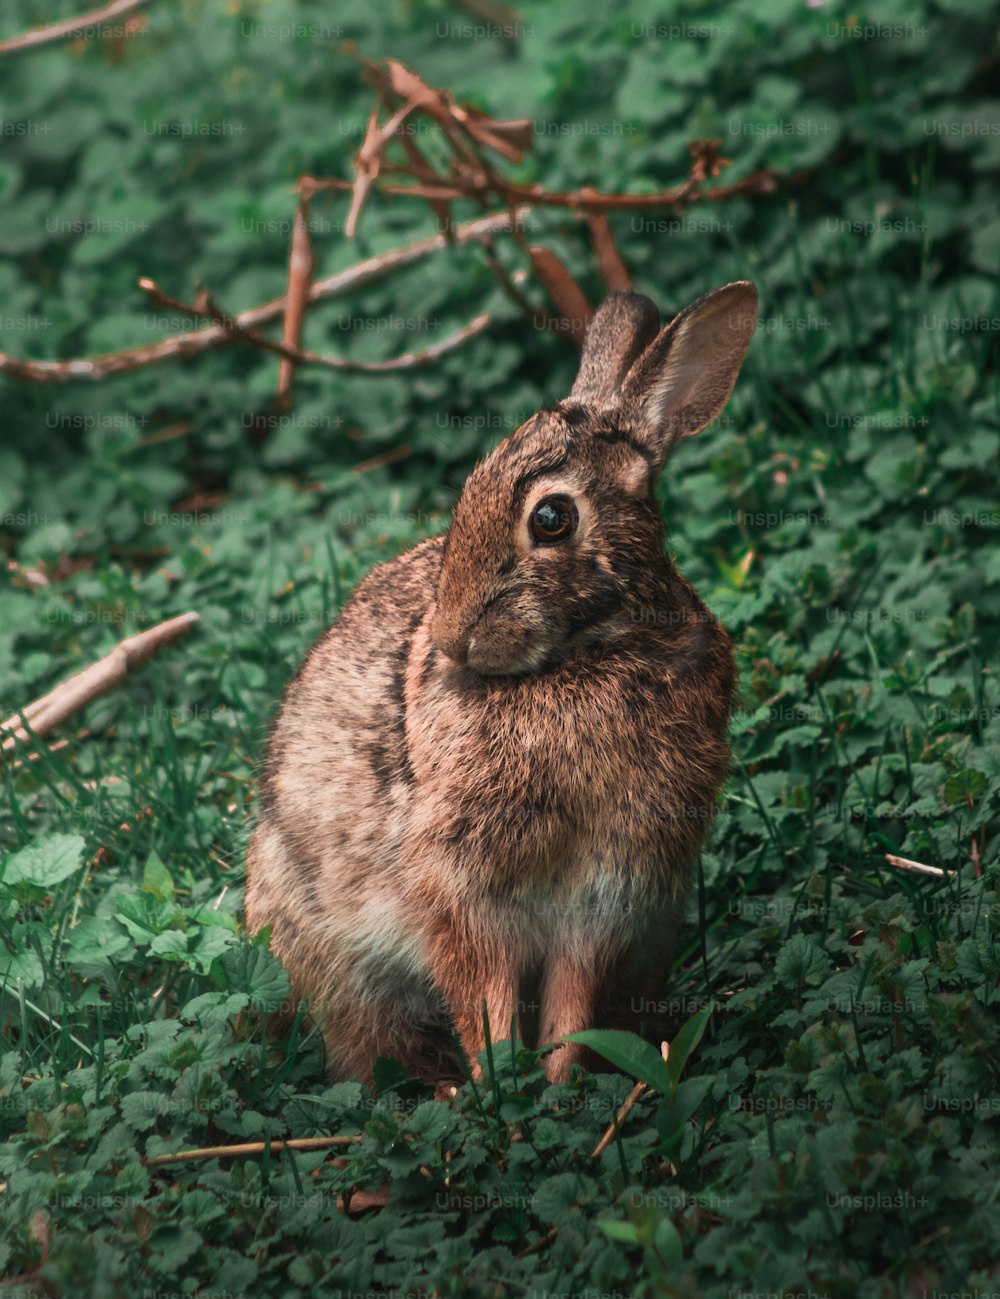 a rabbit is sitting in the grass looking at the camera